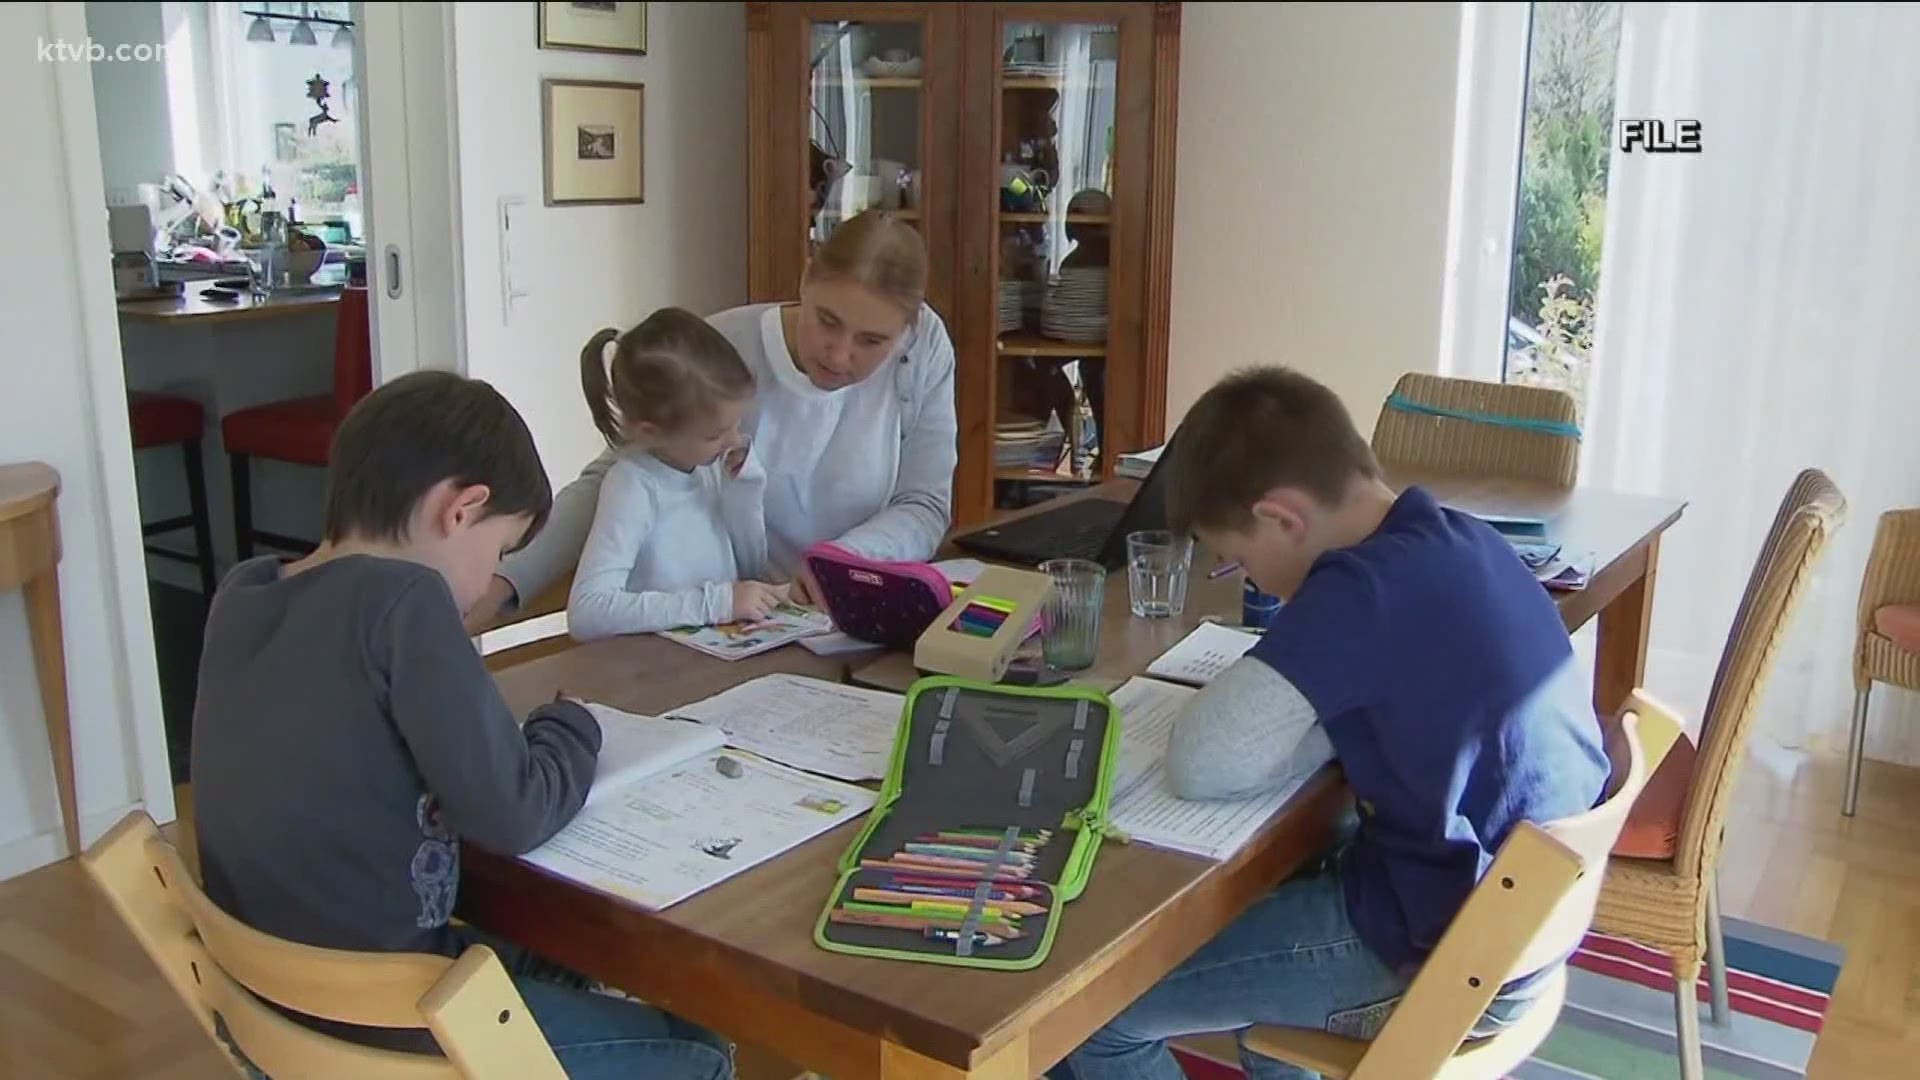 KTVB spoke with a mother who started a popular Facebook group for parents interested in discussing micro-schools.